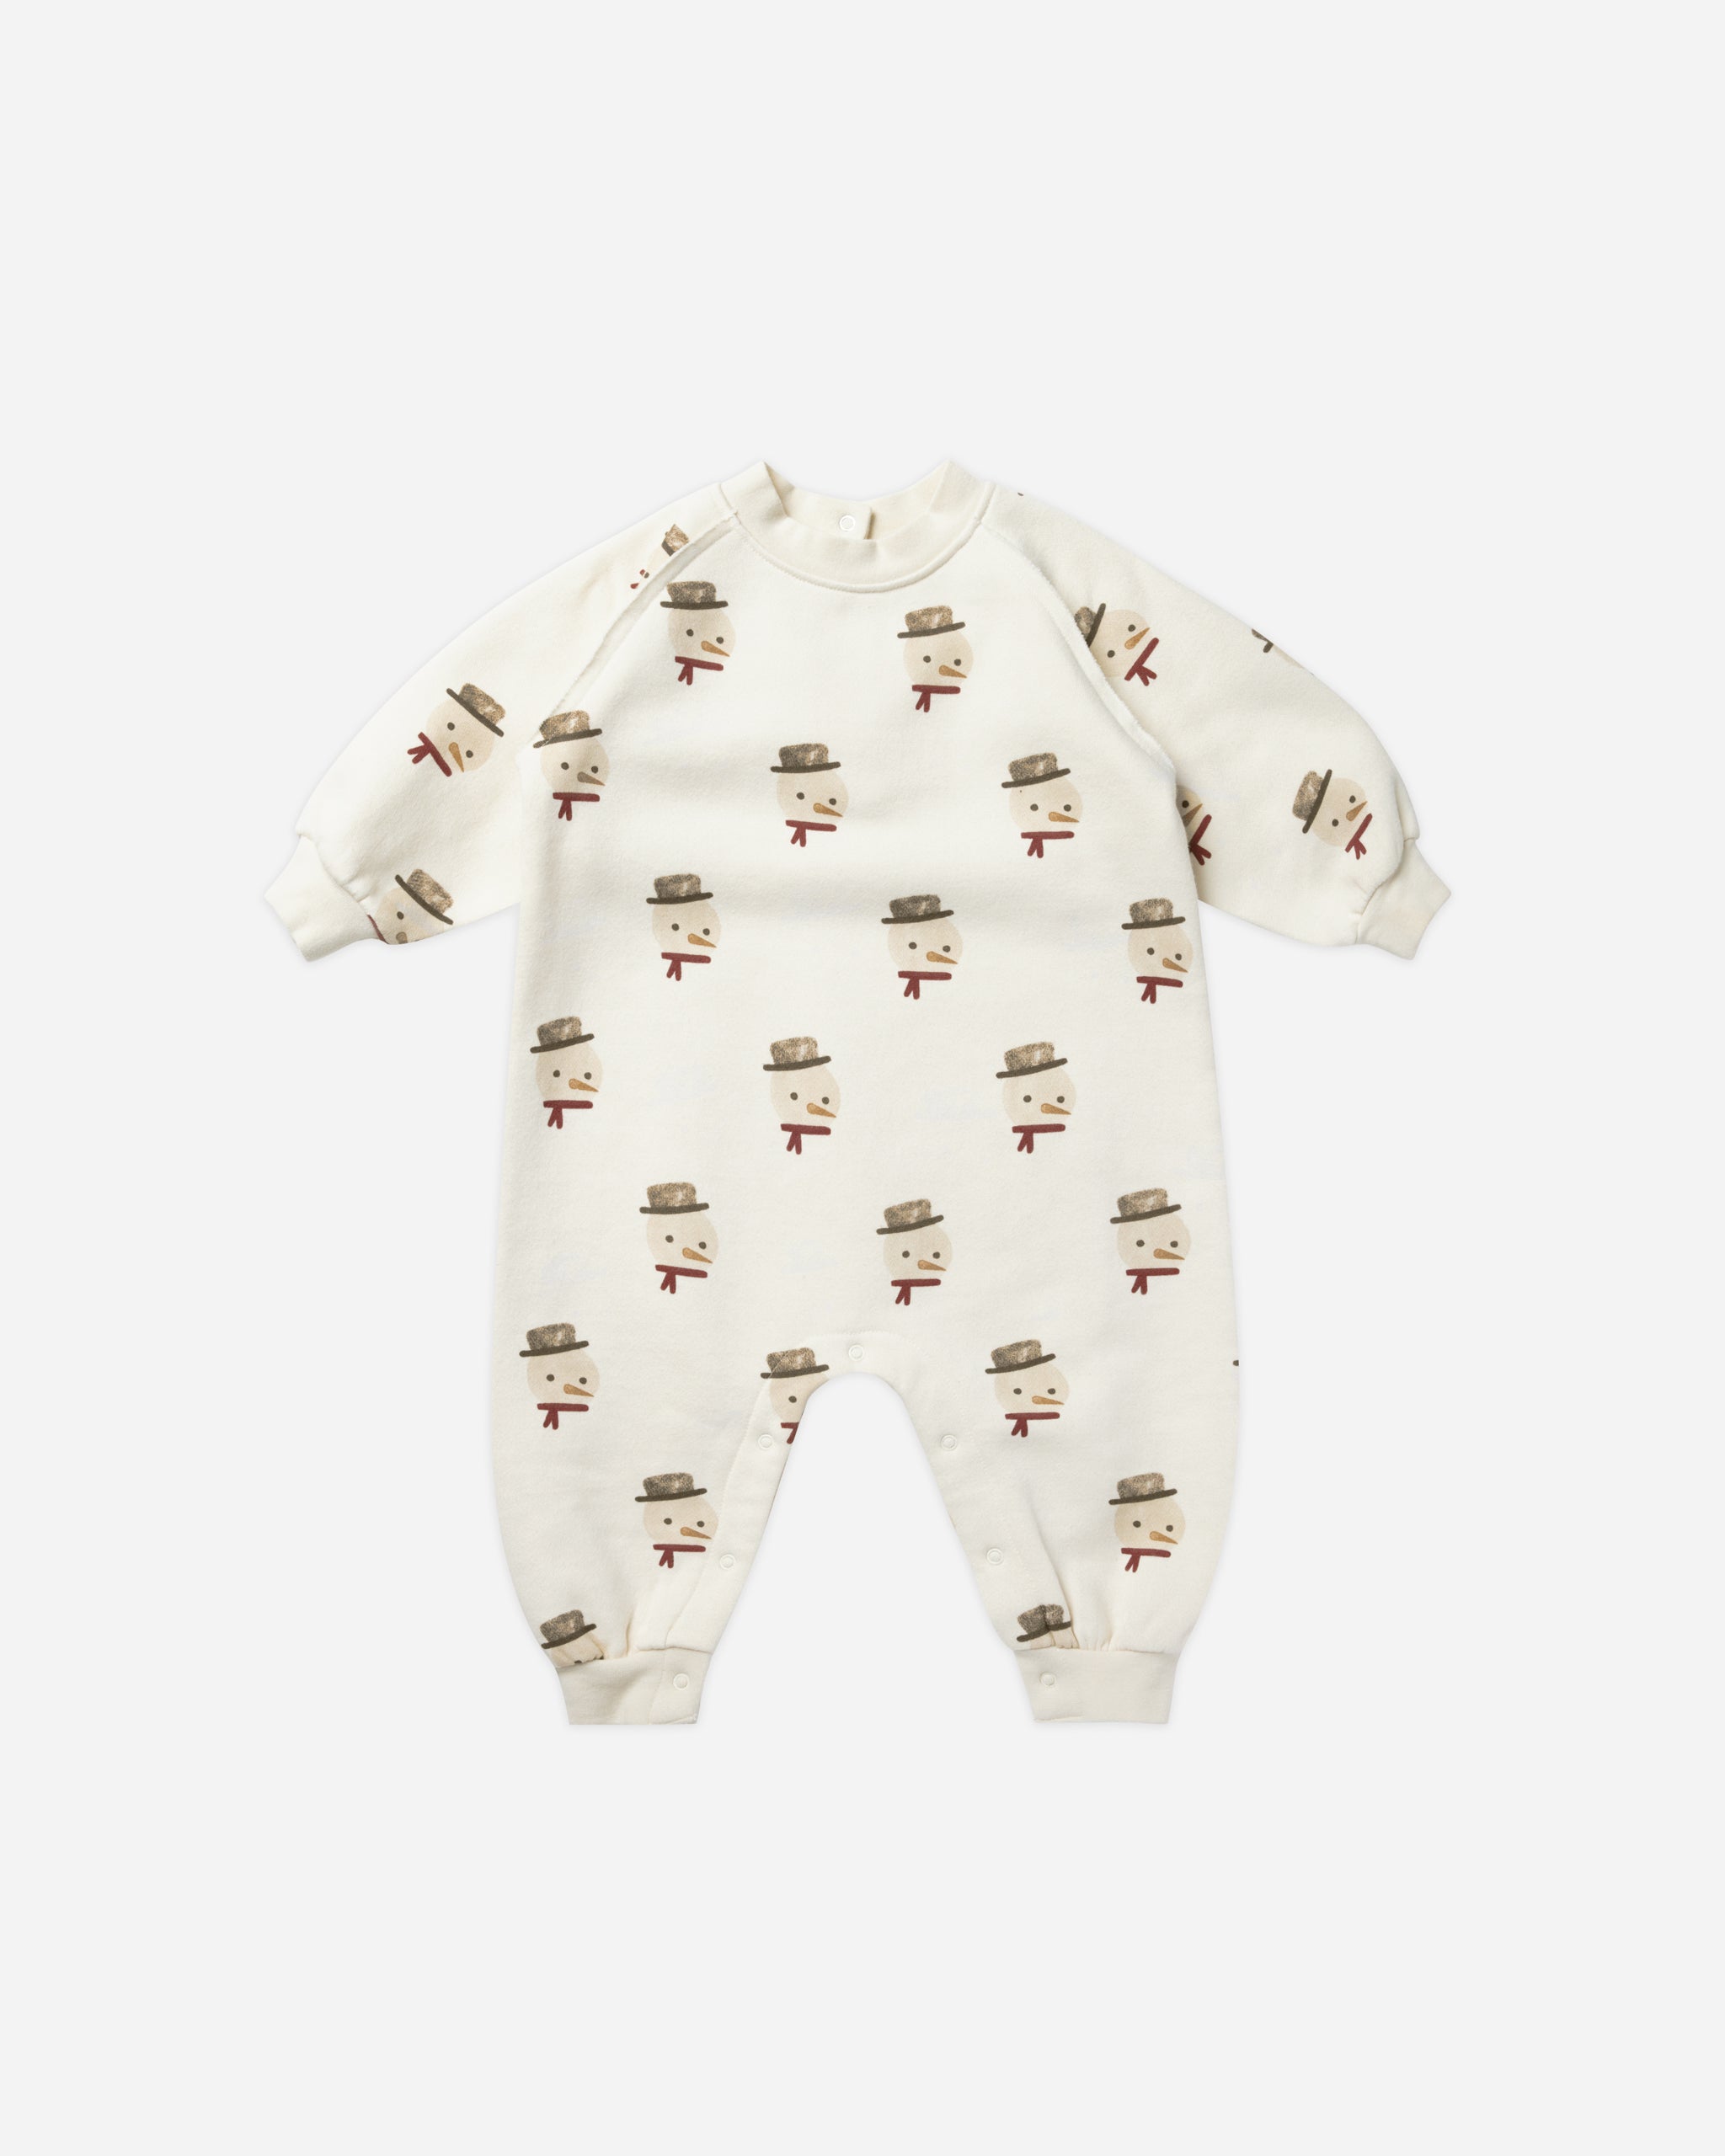 Raglan Jumpsuit || Snowman - Rylee + Cru | Kids Clothes | Trendy Baby Clothes | Modern Infant Outfits |